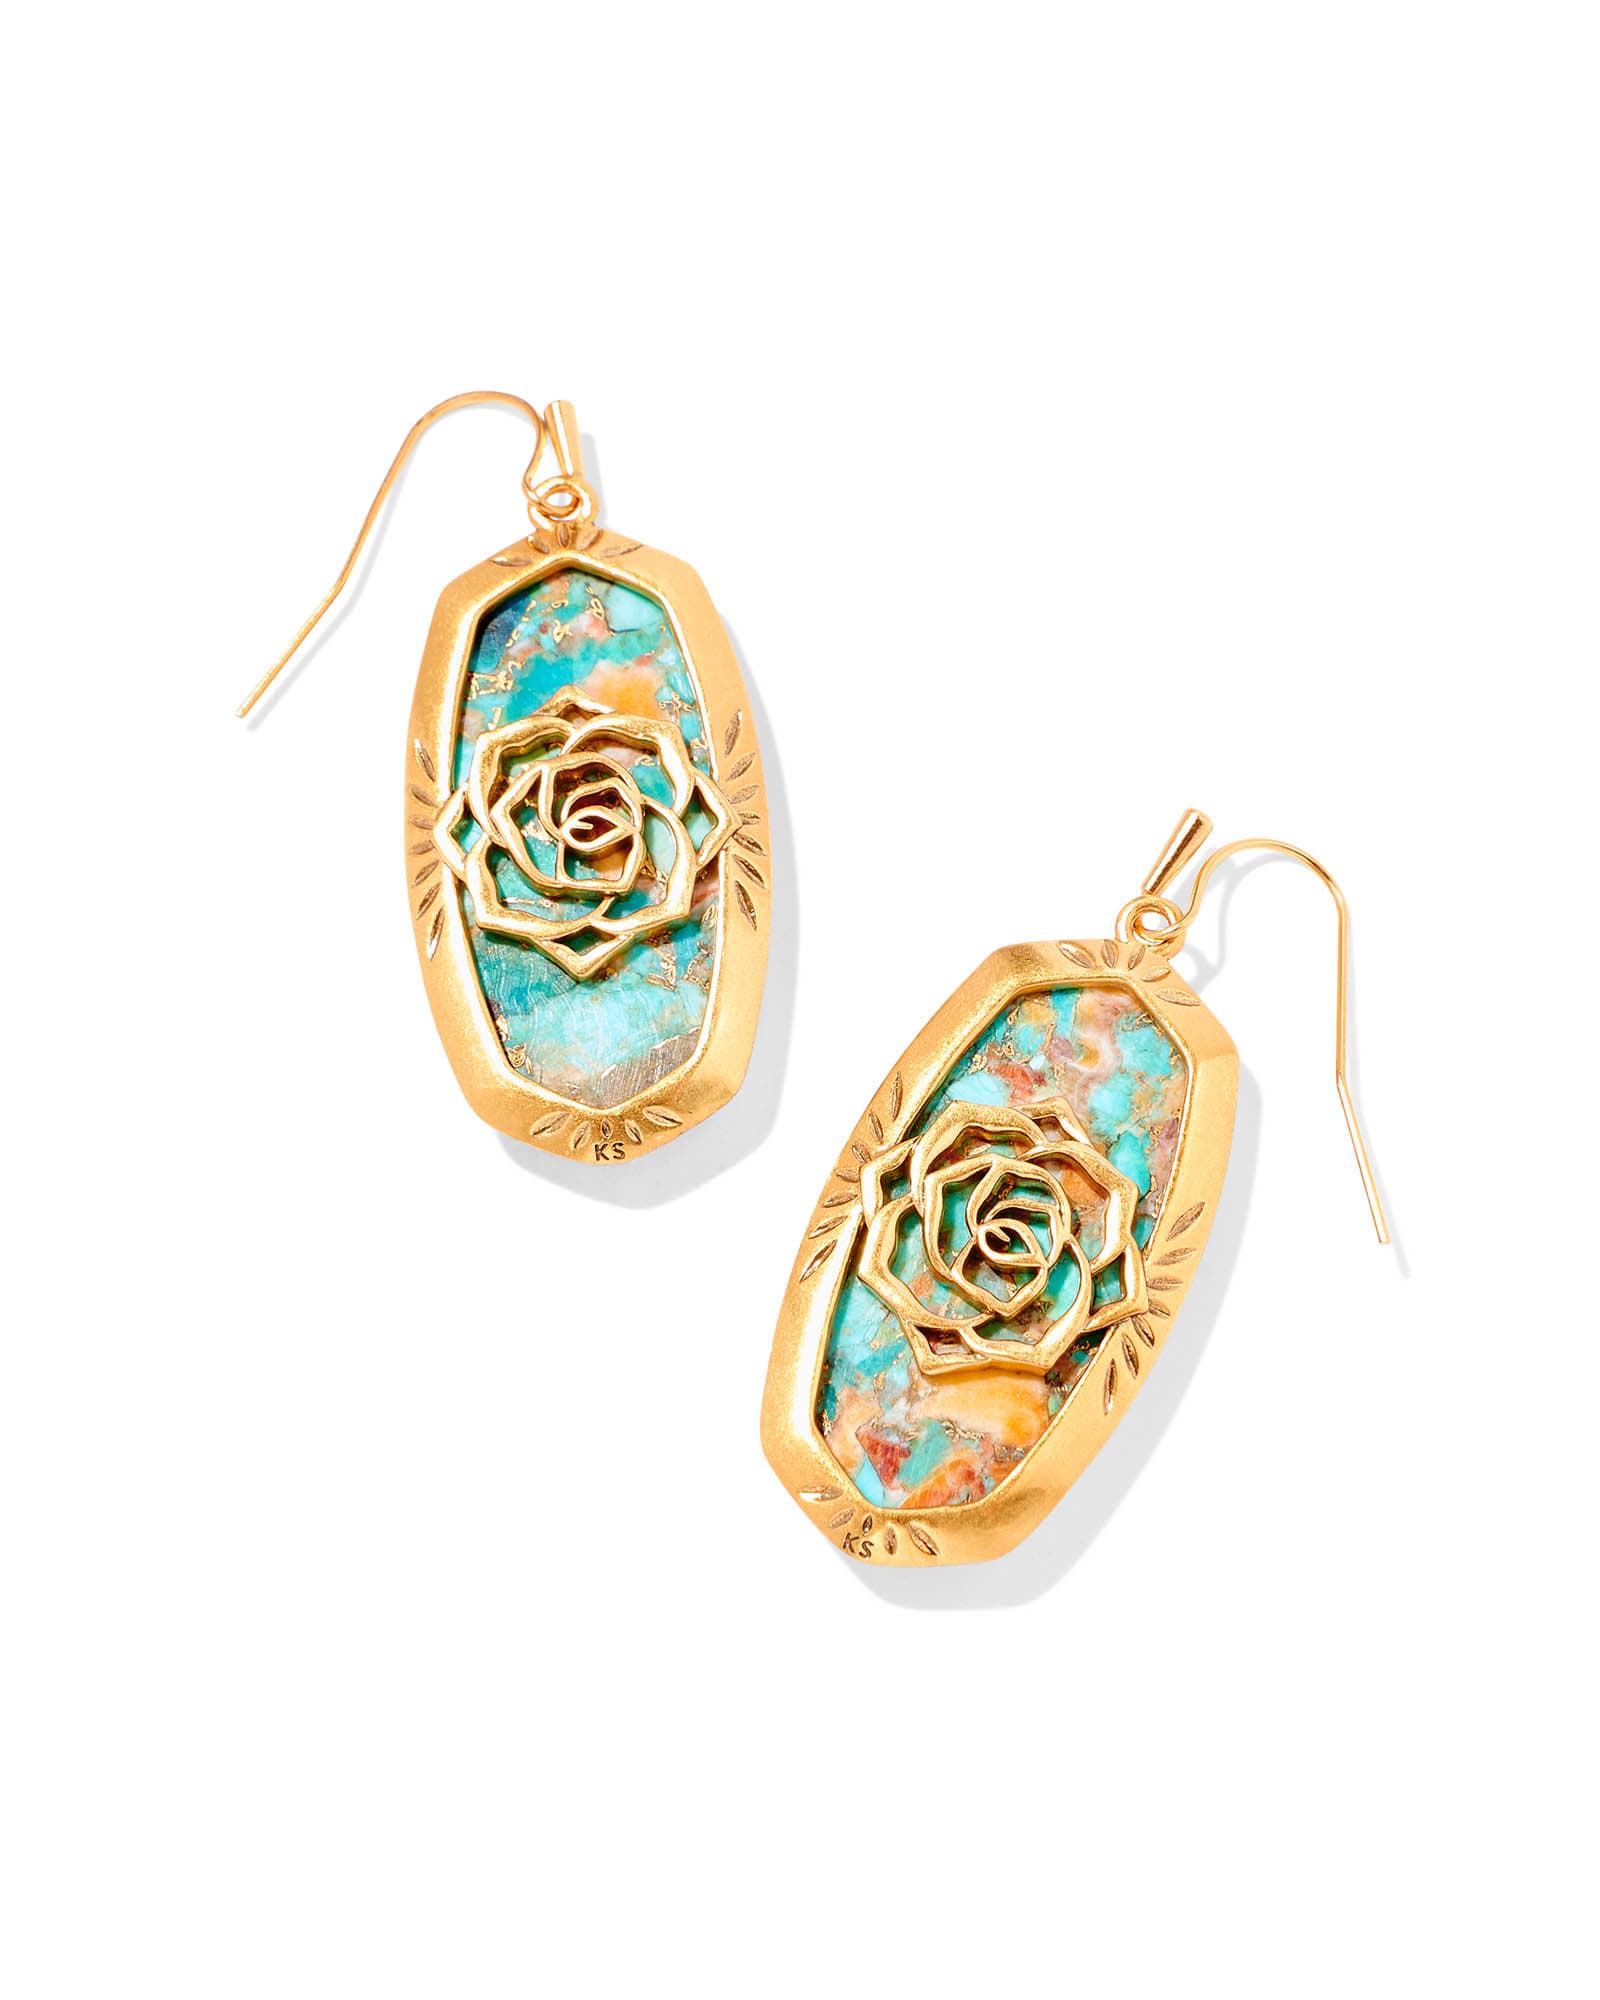 Elle Vintage Gold Etch Frame Drop Earrings in Bronze Veined Turquoise Magnesite Red Oyster